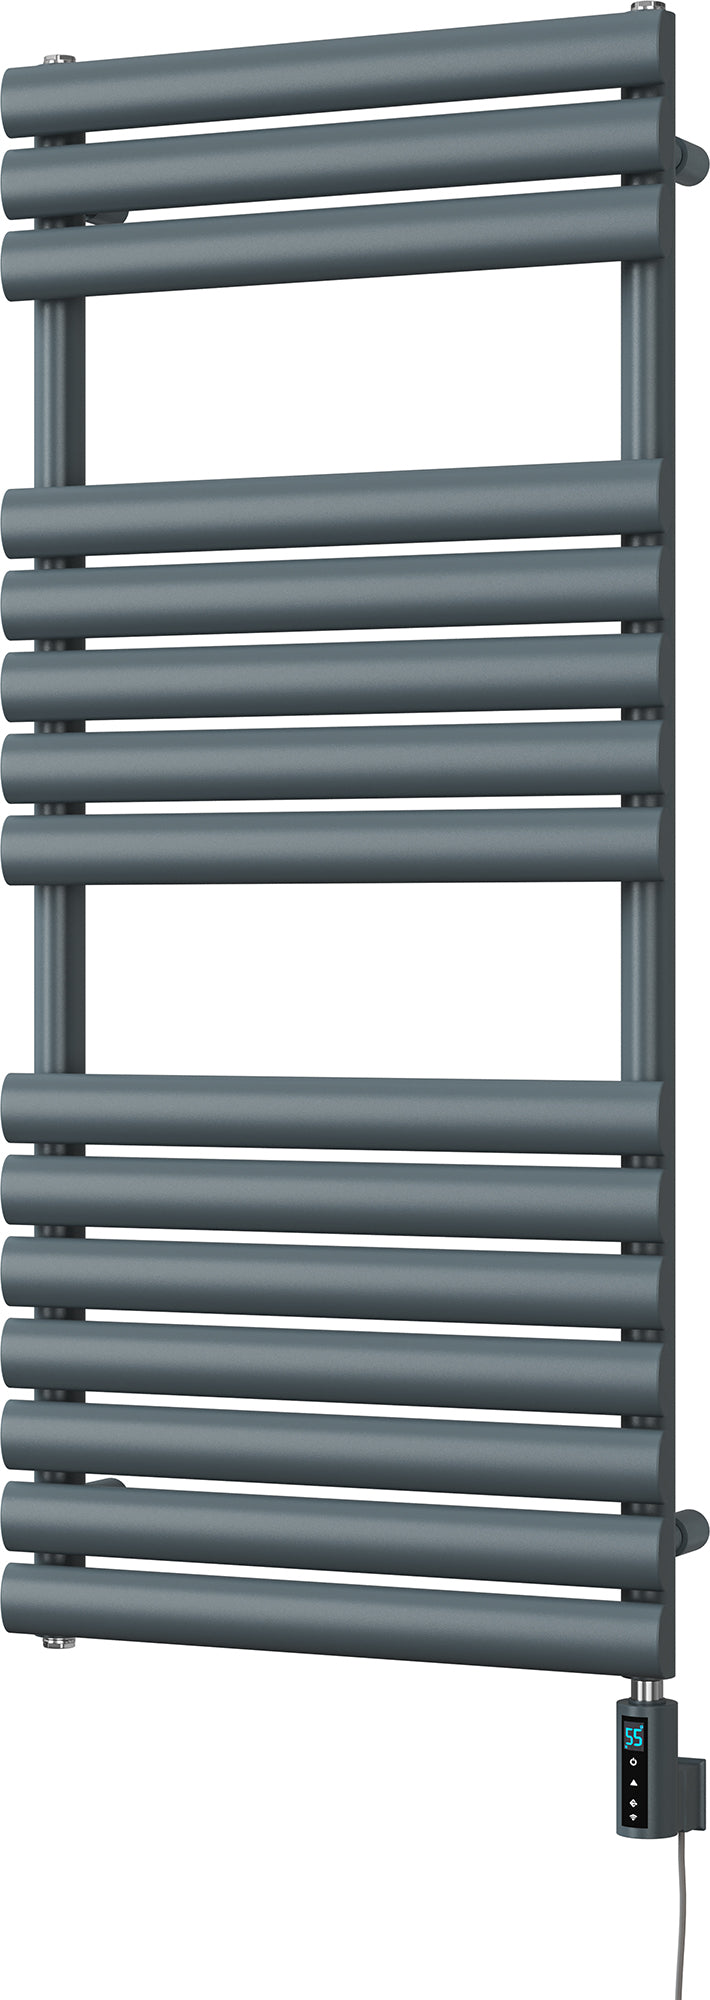 Omeara - Anthracite Electric Towel Rail H1120mm x W500mm 300w Thermostatic WIFI